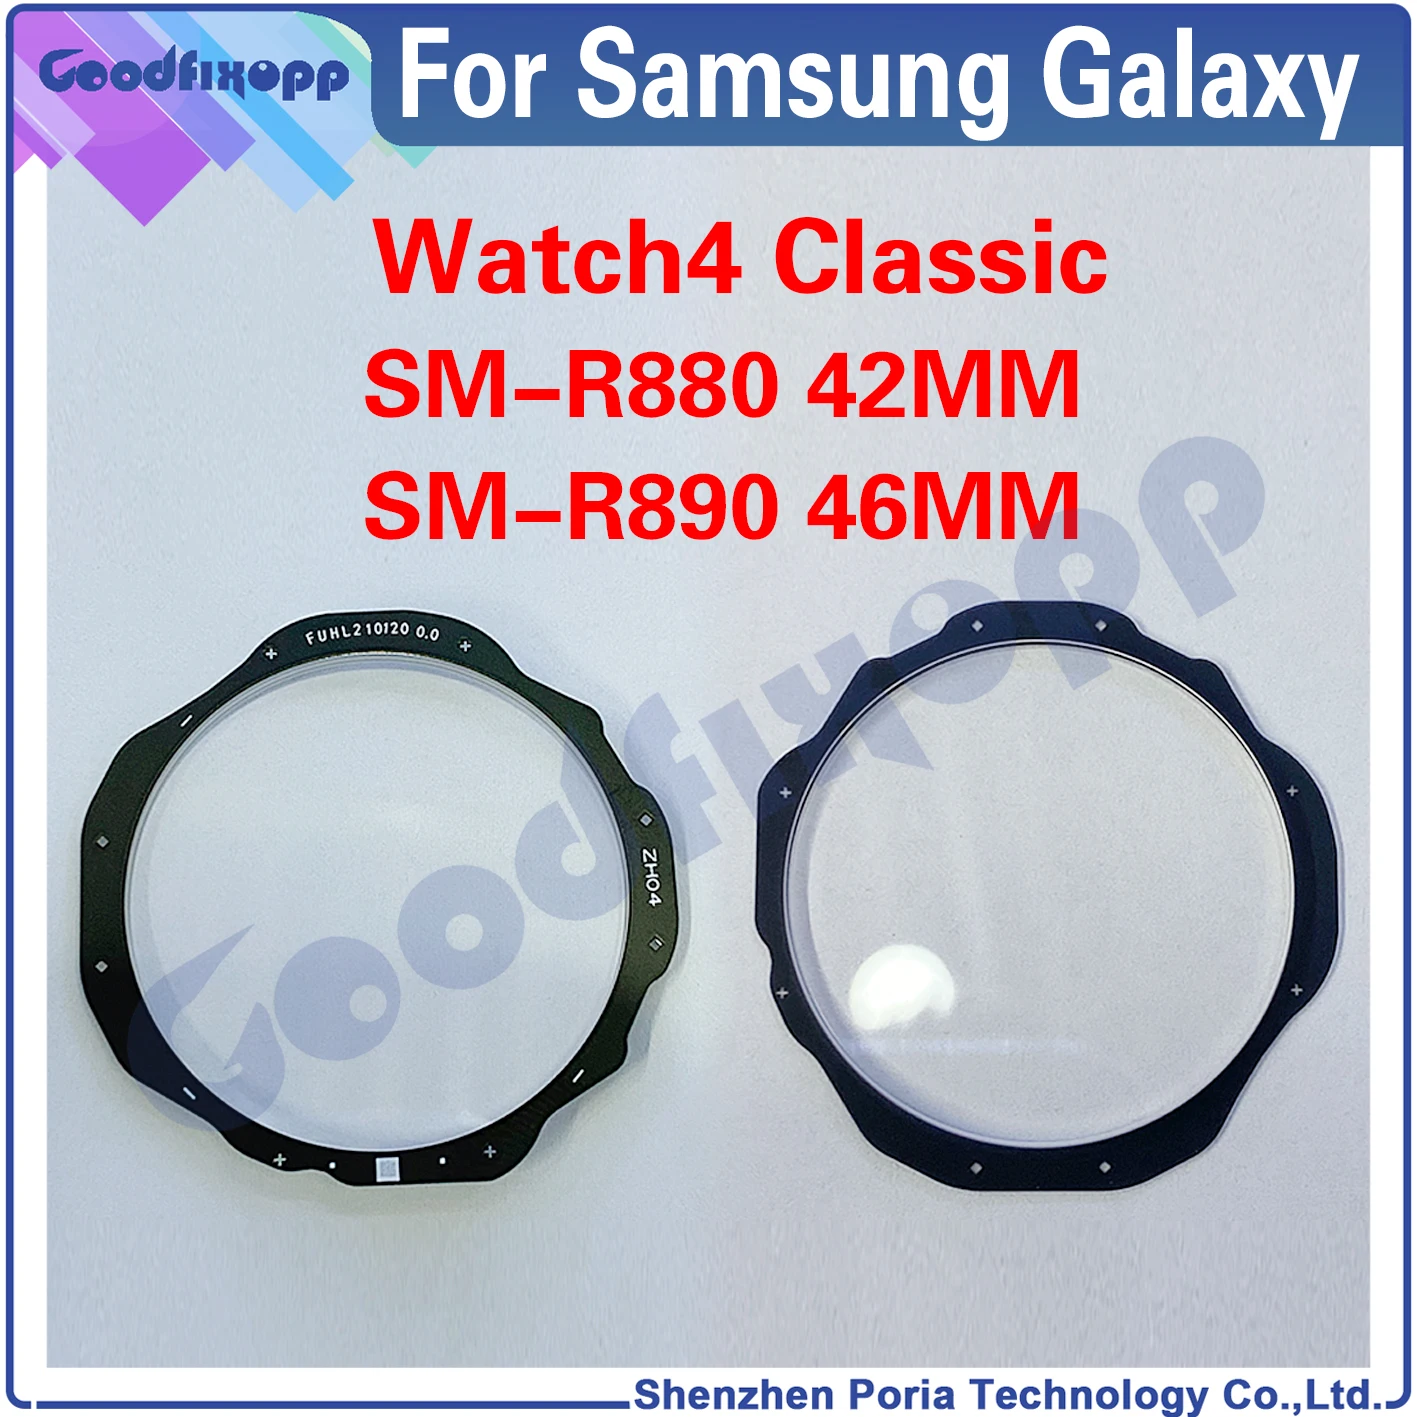 

For Samsung Galaxy Watch4 Classic R880 42MM / R890 46MM Touch Screen Outer Glass Lens Replacement For Samsung Watch 4 Classic